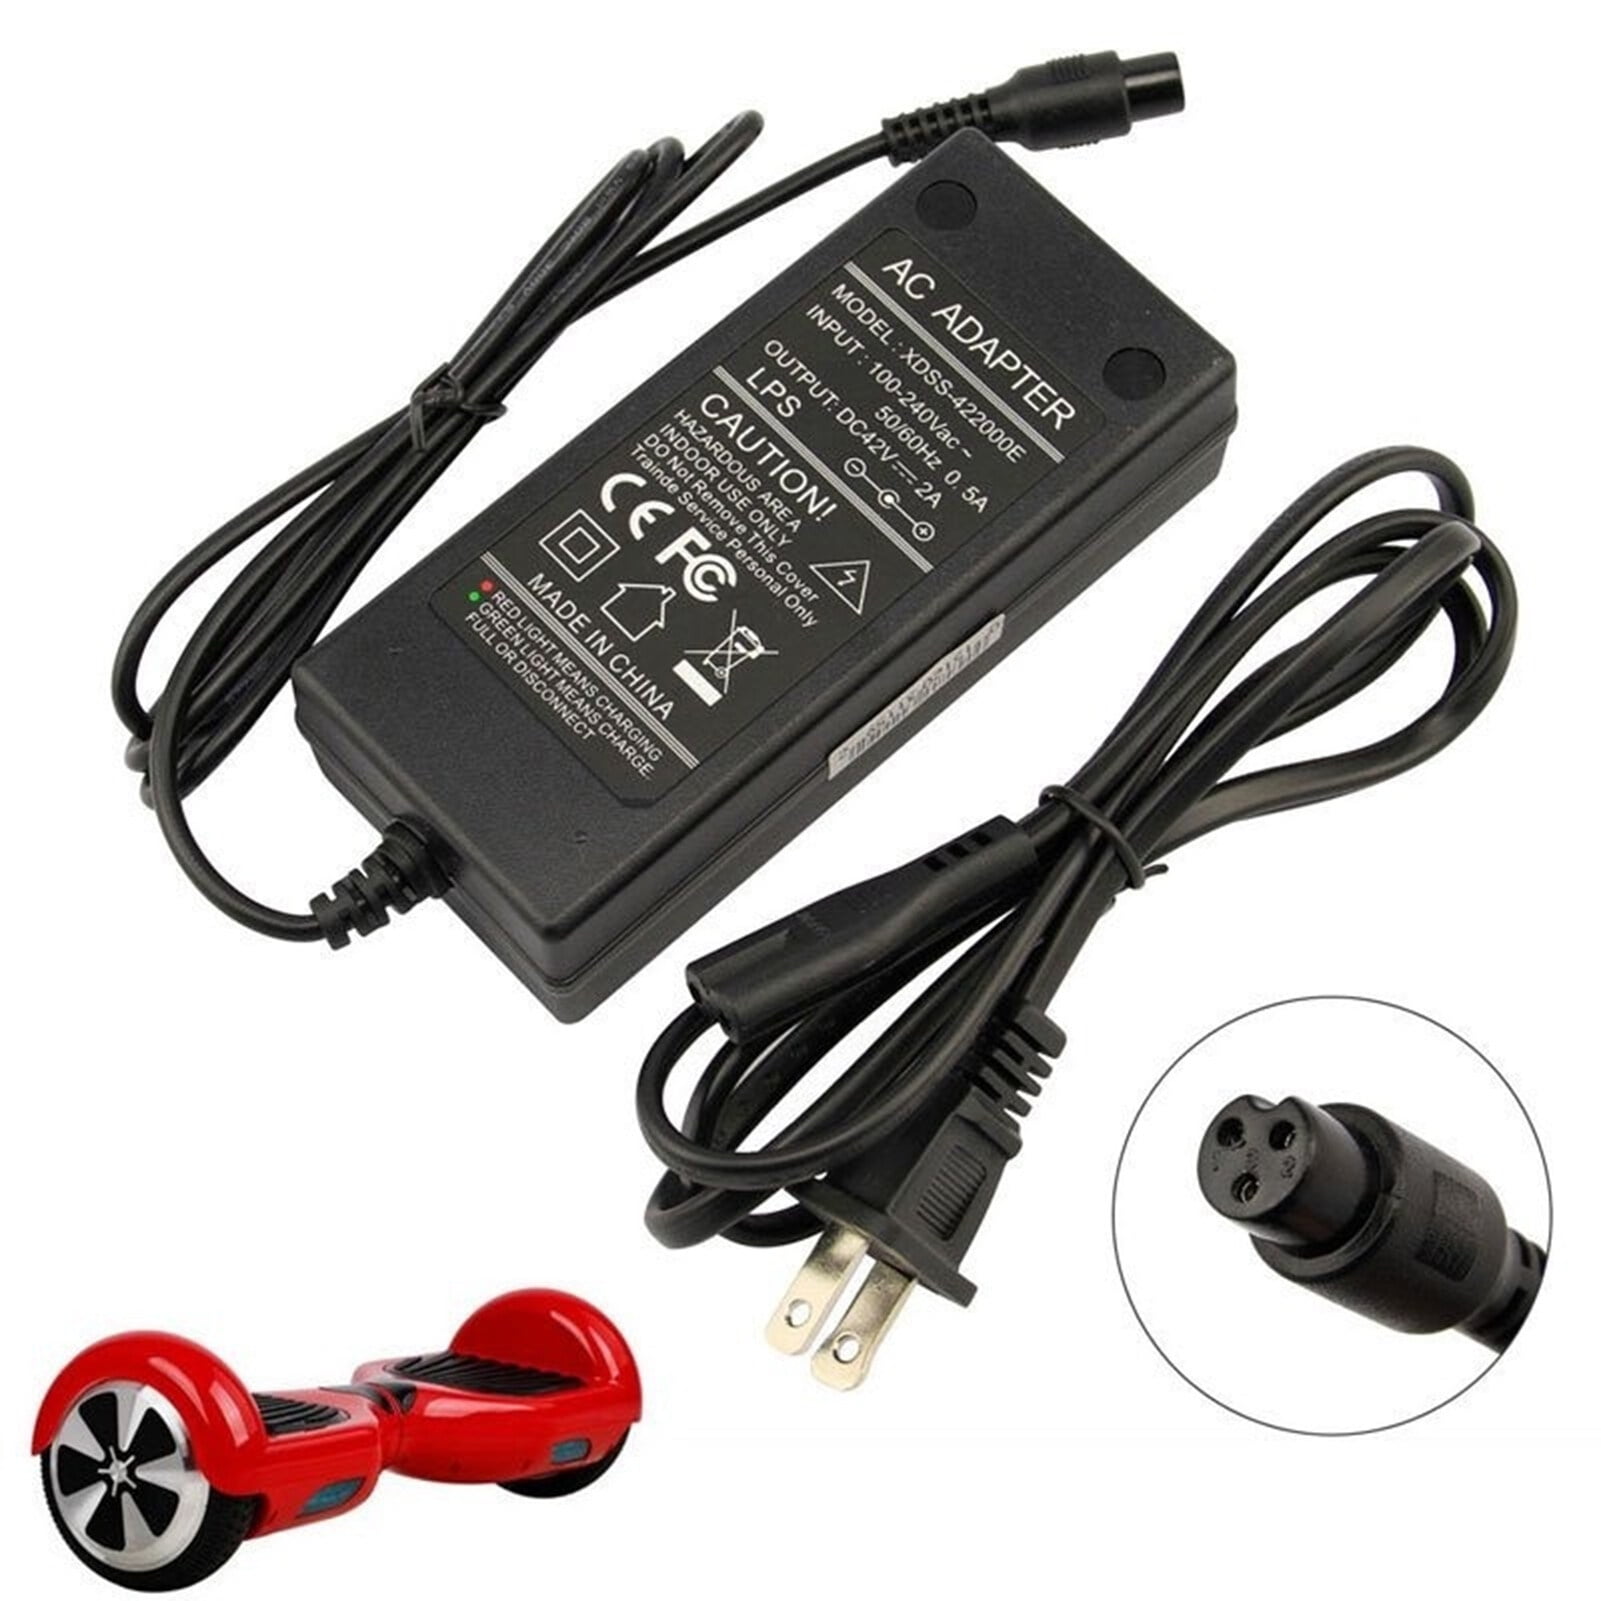 42v 1.5a Lithium Battery Charger For Self Balancing Scooter Hoverboard  Universal Battery Charger Uk/eu/au Plug